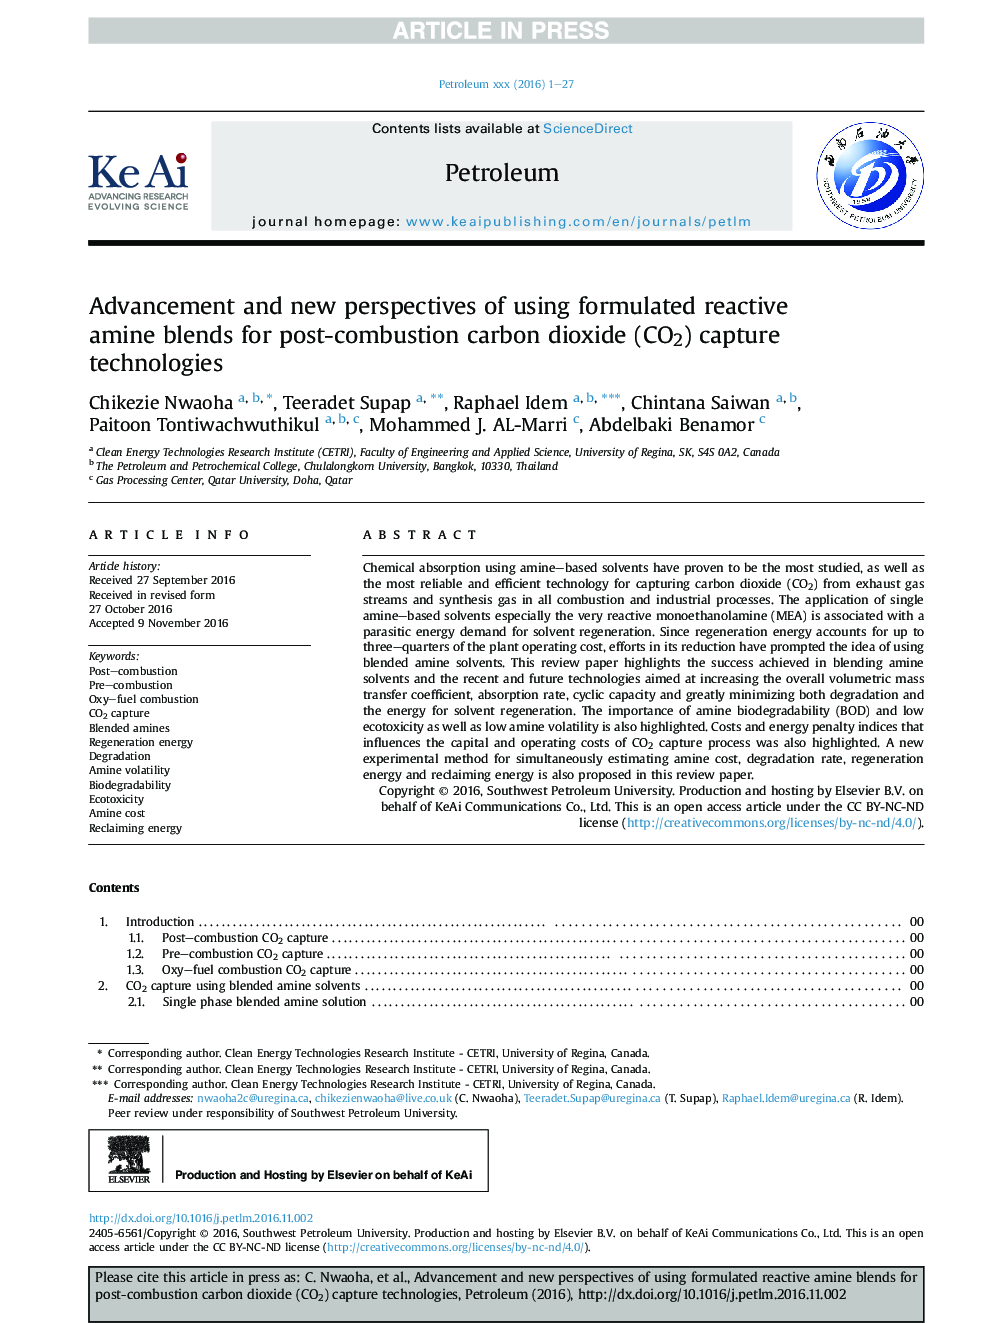 Advancement and new perspectives of using formulated reactive amine blends for post-combustion carbon dioxide (CO2) capture technologies